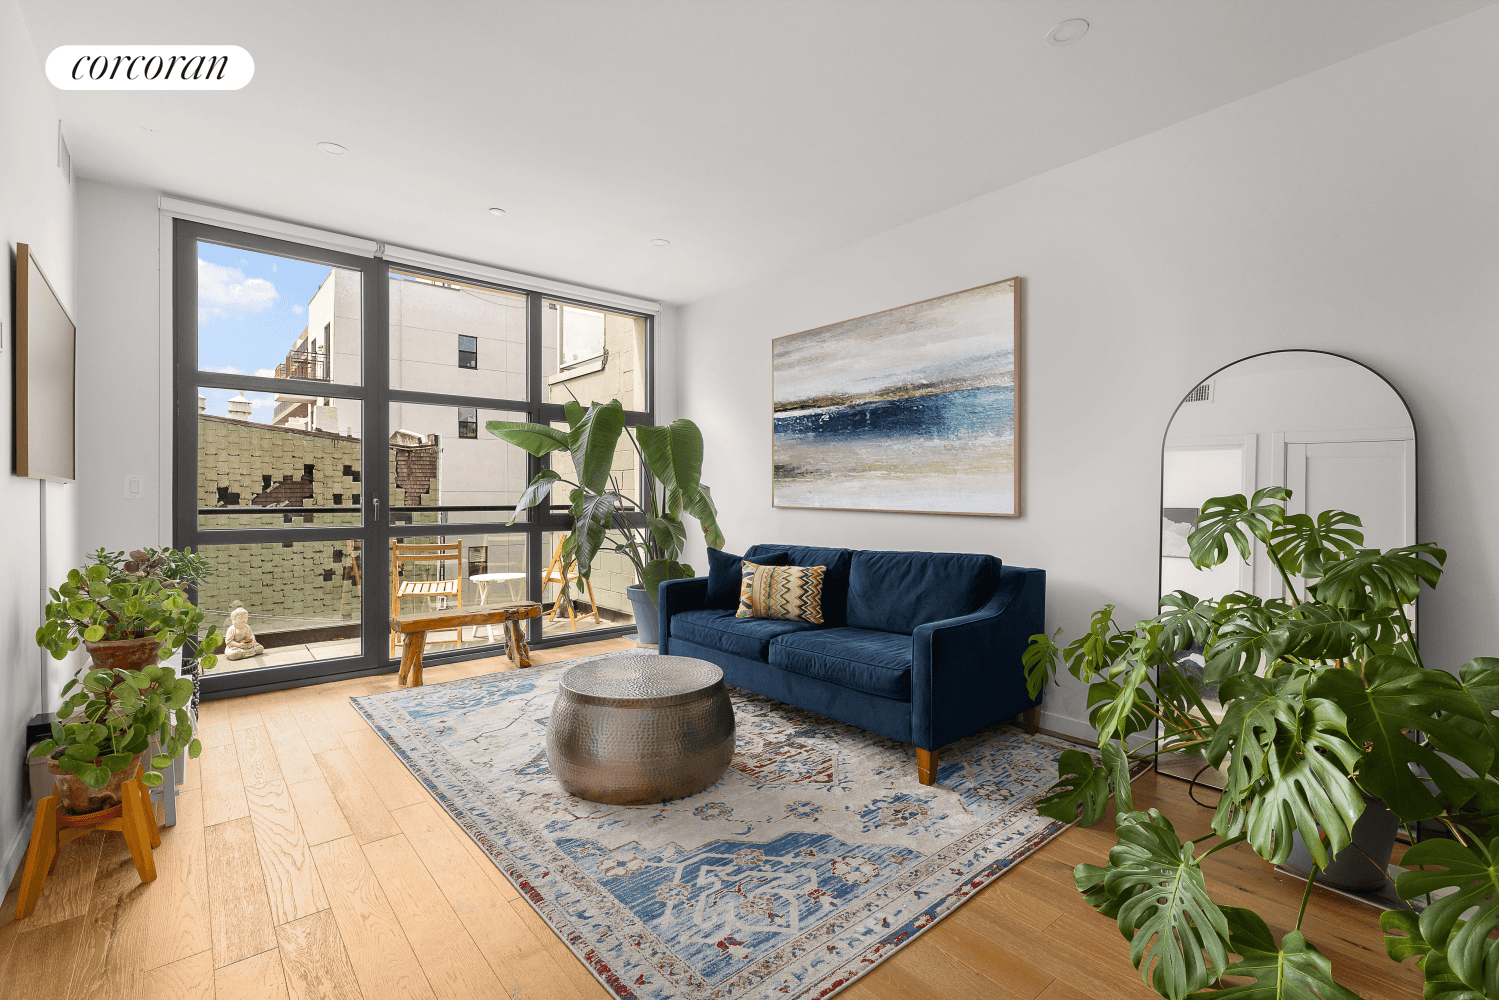 Apartment 3A at 383 Manhattan Ave is a one bedroom, one bathroom apartment with style, character and comfort in Williamsburg, Brooklyn ; one of New York City's most sought after ...